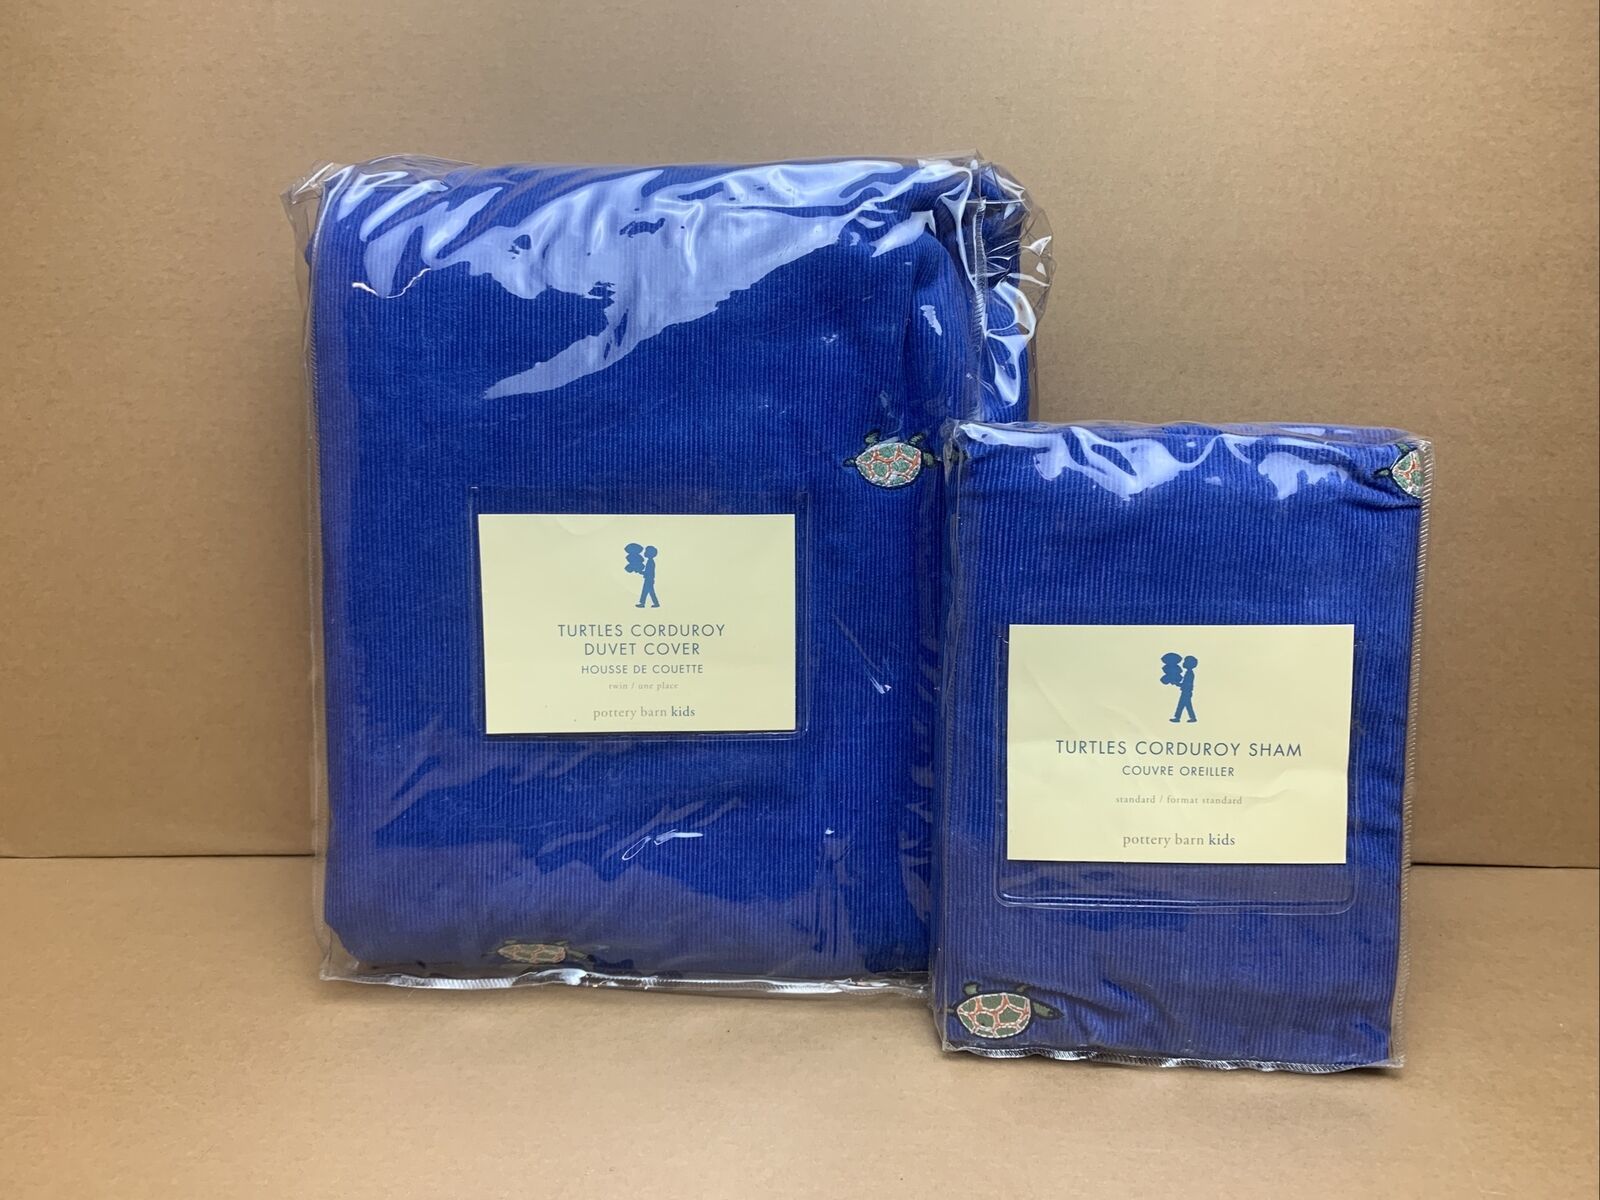 NEW Pottery Barn Kids TWIN Duvet Cover - Blue Corduroy Turtle Embroidery & SHAM - $89.99